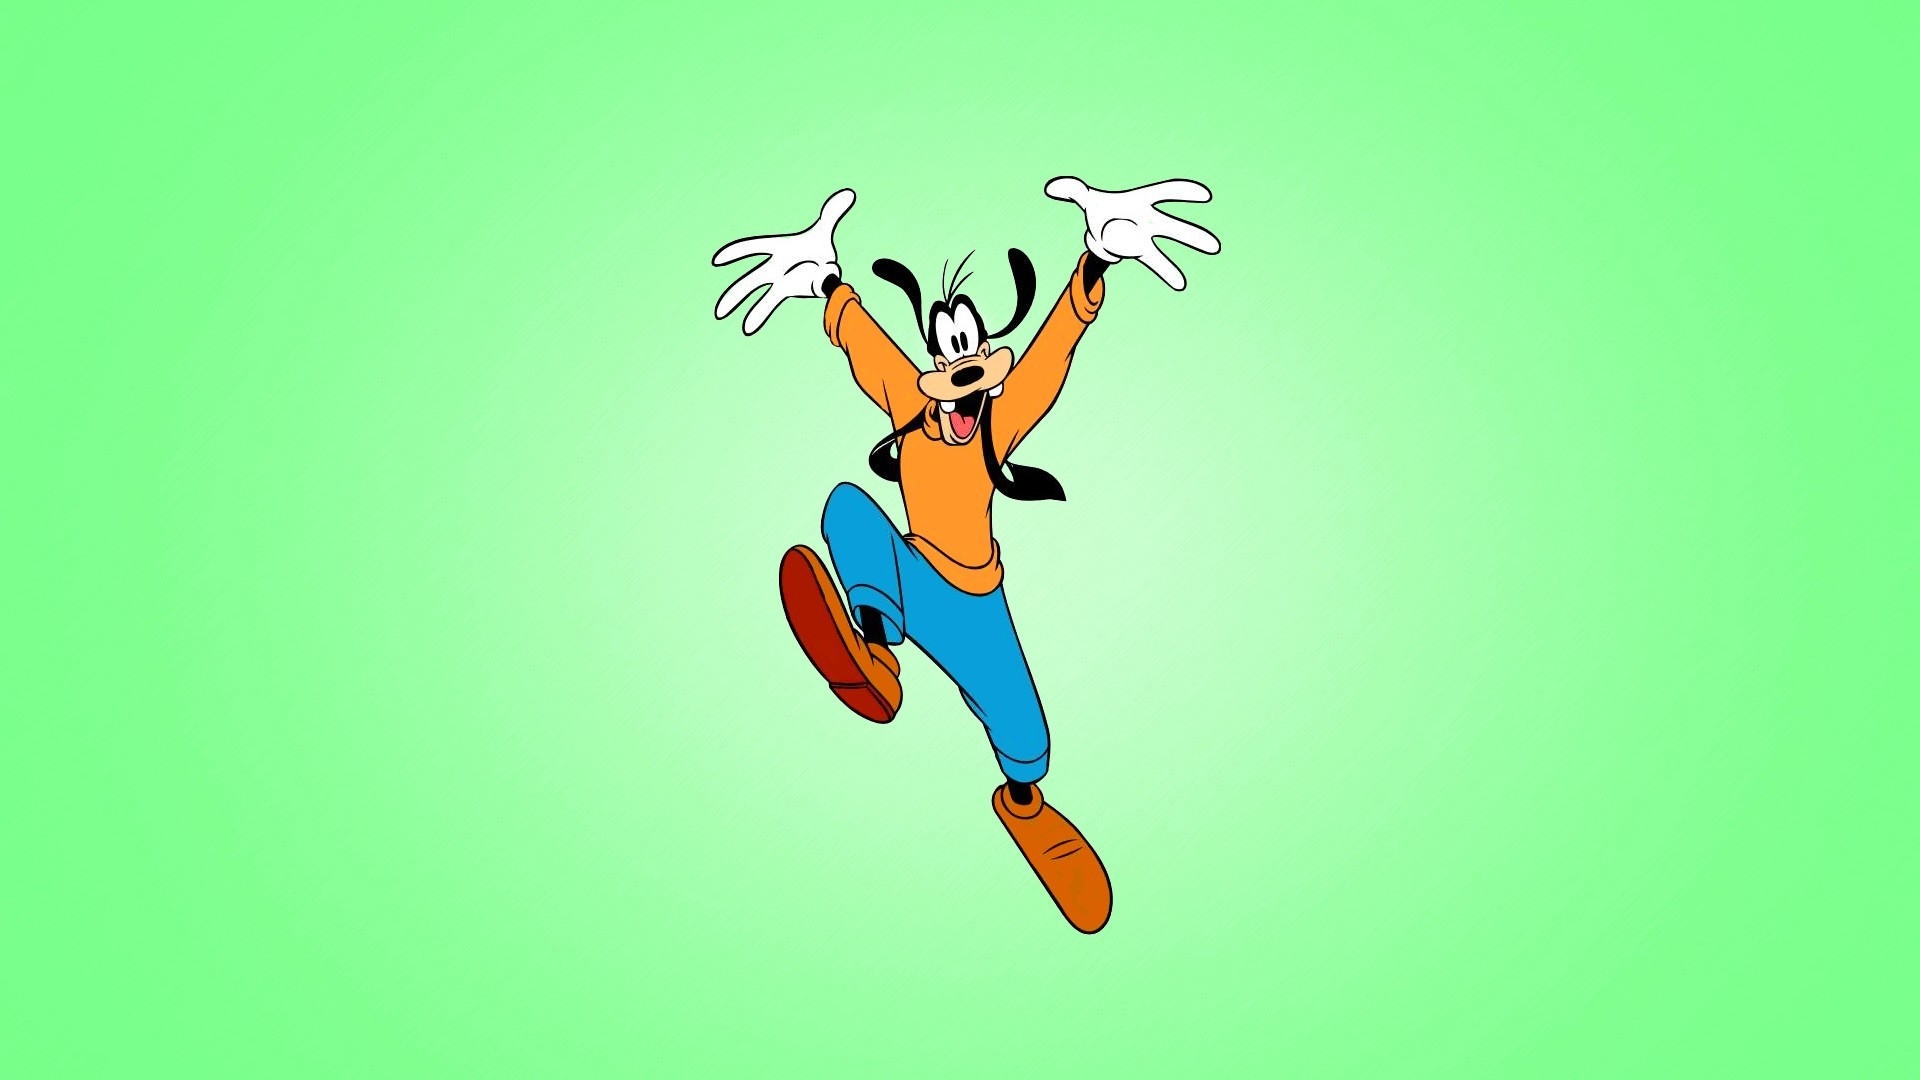 Goofy Character for 1920 x 1080 HDTV 1080p resolution